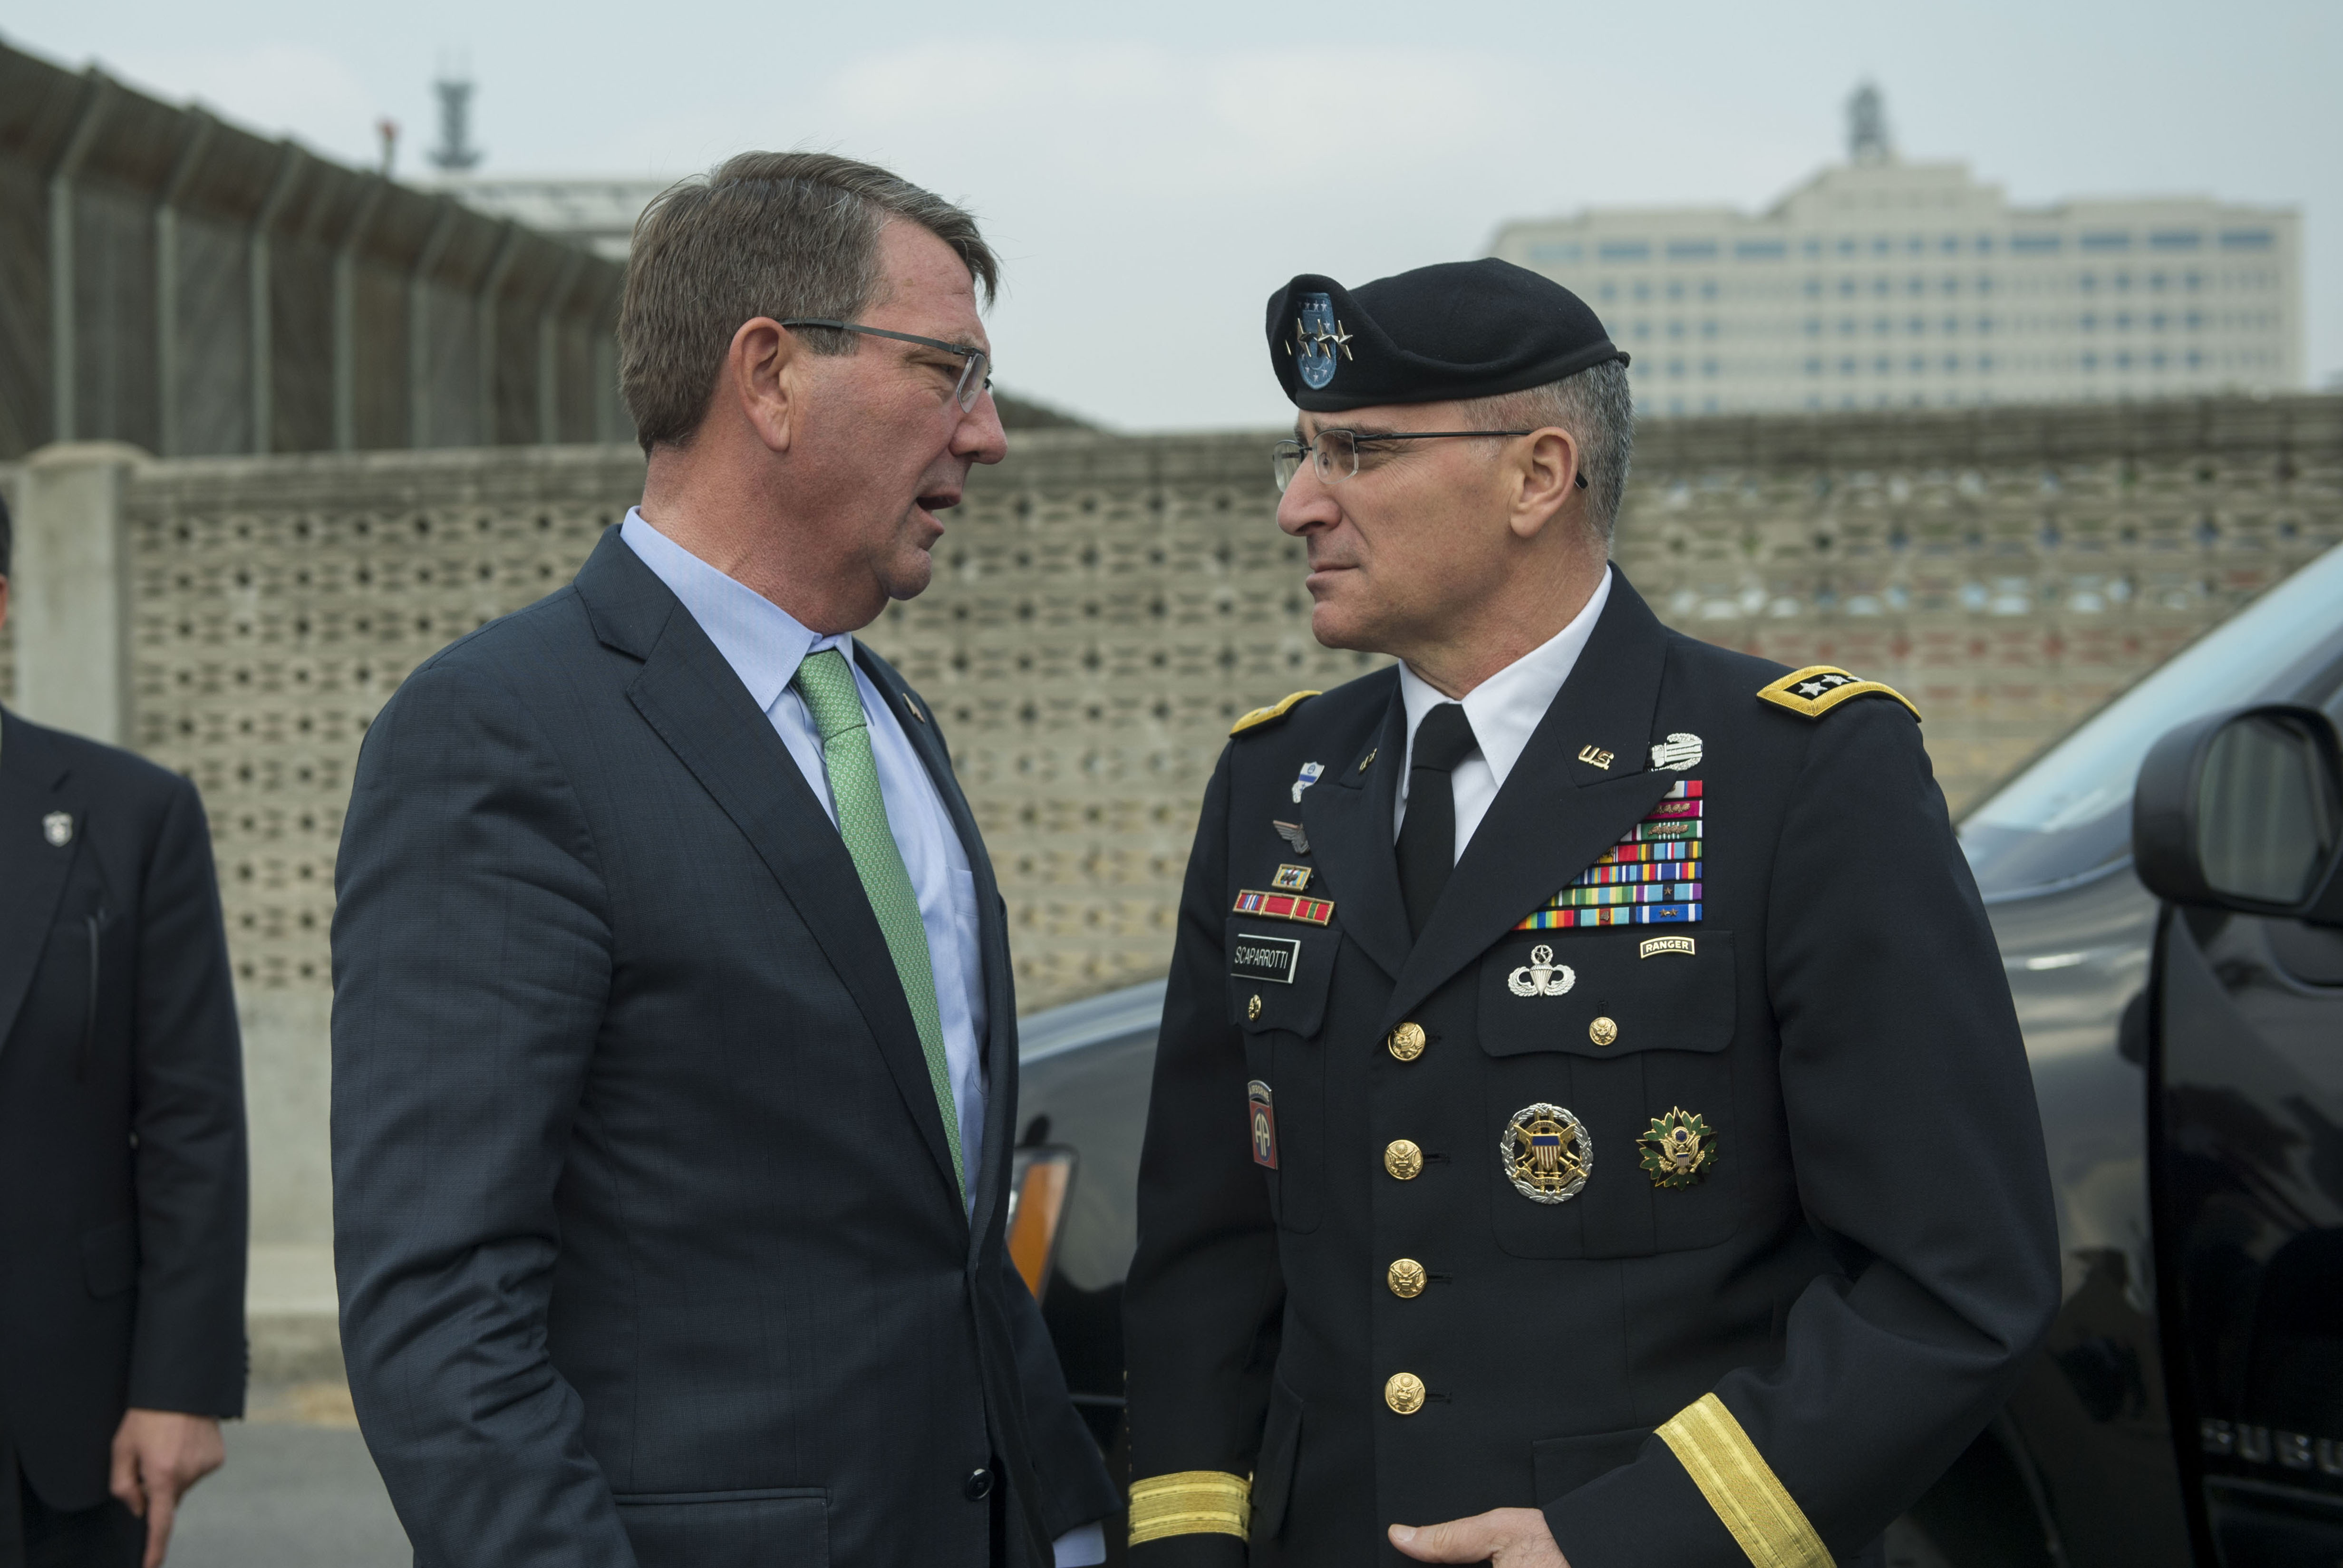 Secretary of Defense Ash Carter says goodbye to Army Gen. Curtis Scaparrotti, commander, U.S. Forces Korea, after attending the Security Consultative Meeting Nov. 2, 2015 in Seoul, Republic of Korea. U.S. Army photo.